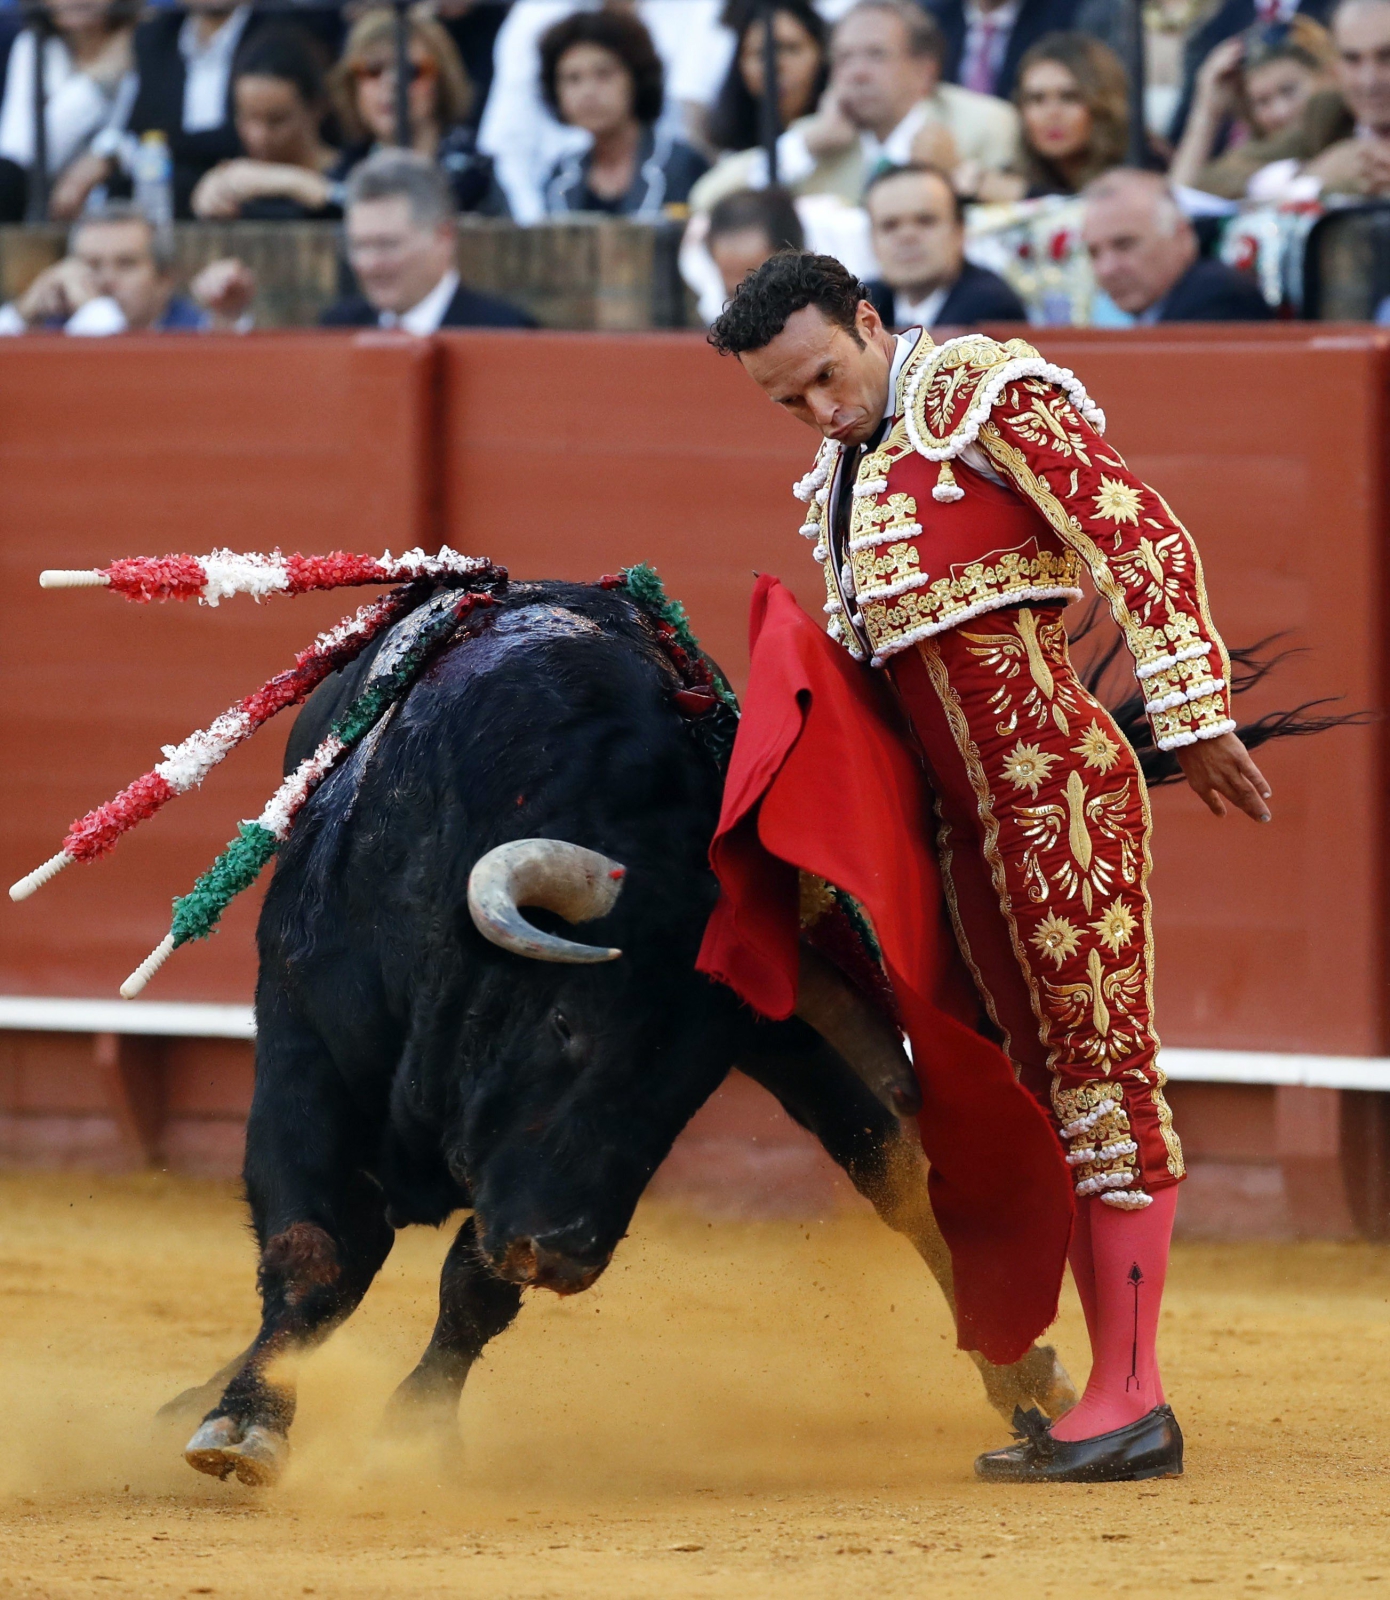 epa05947329 Spanish bullfighter Antonio Ferrera fights with his second bull of the evening during the bullfighting held on the ocassion of the April's Fair held at the Maestranza bullring in Seville, Andalusia, Spain, 06 May 2017.  EPA/JULIO MUNOZ 
Dostawca: PAP/EPA.